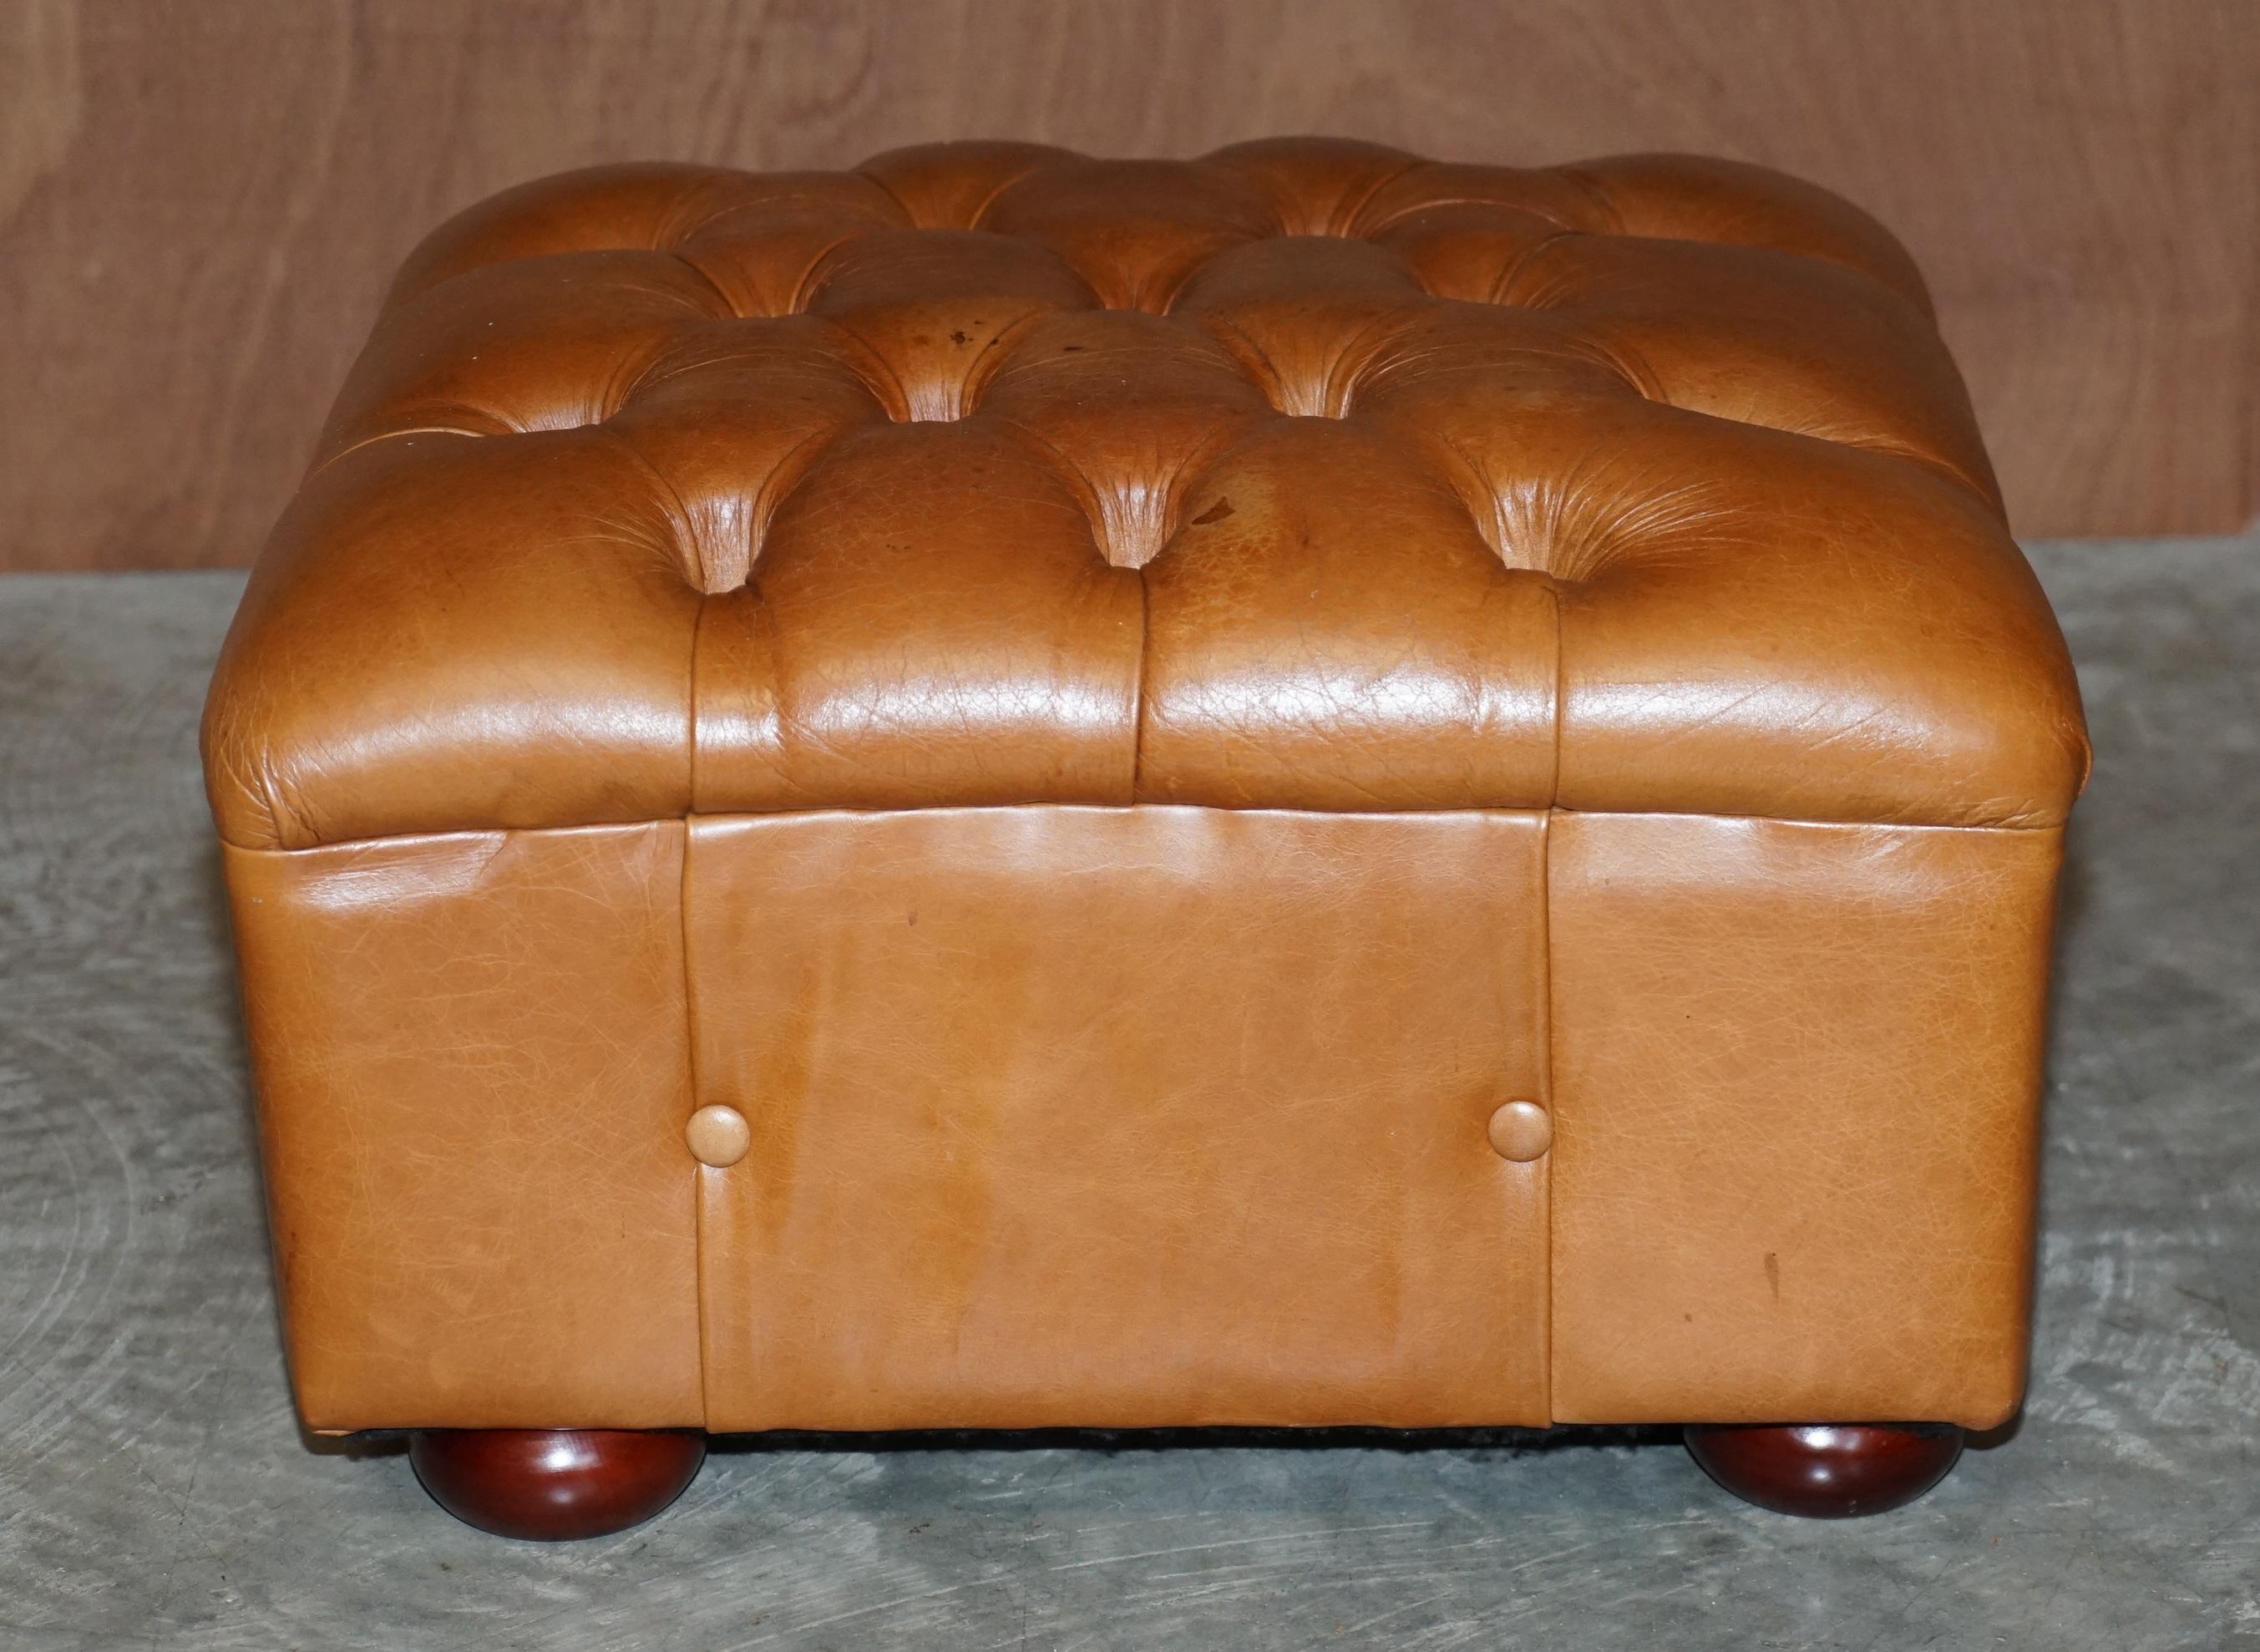 Hand-Crafted Chesterfield Brown Leather Tufted Square Footstool Vintage Biker Tan Leather For Sale